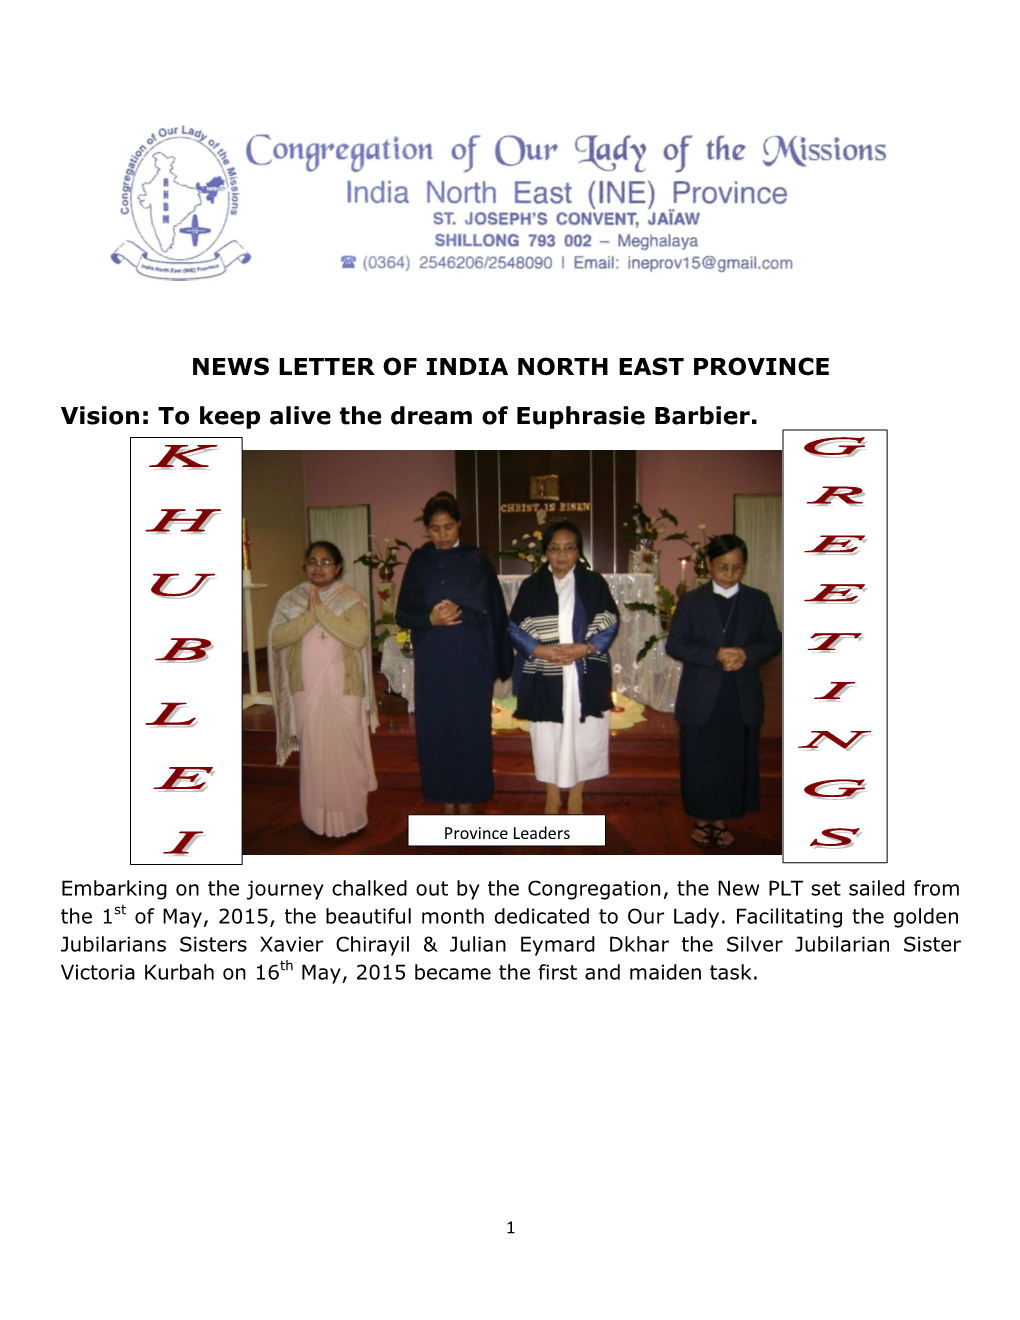 NEWS LETTER of INDIA NORTH EAST PROVINCE Vision: to Keep Alive the Dream of Euphrasie Barbier